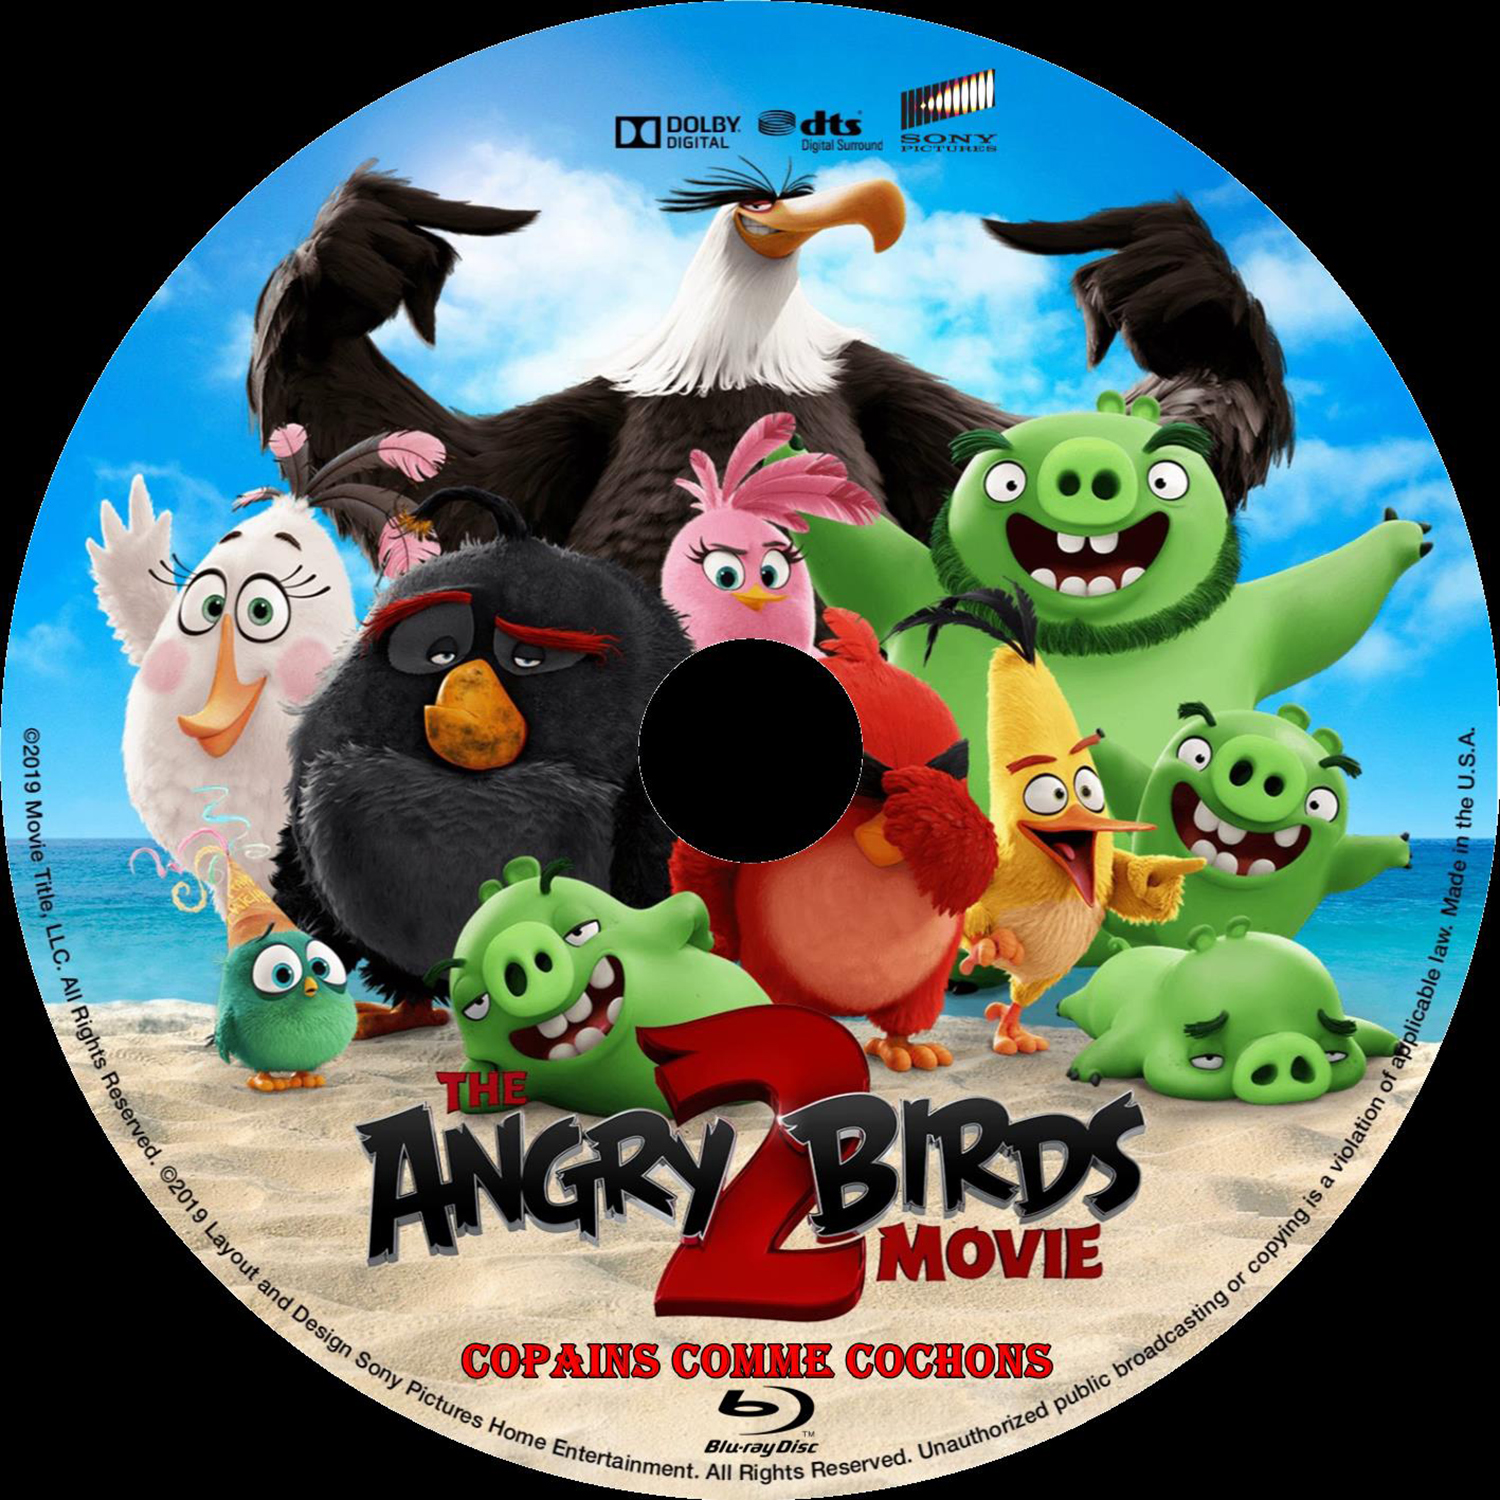 Angry Birds : Copains comme cochons custom